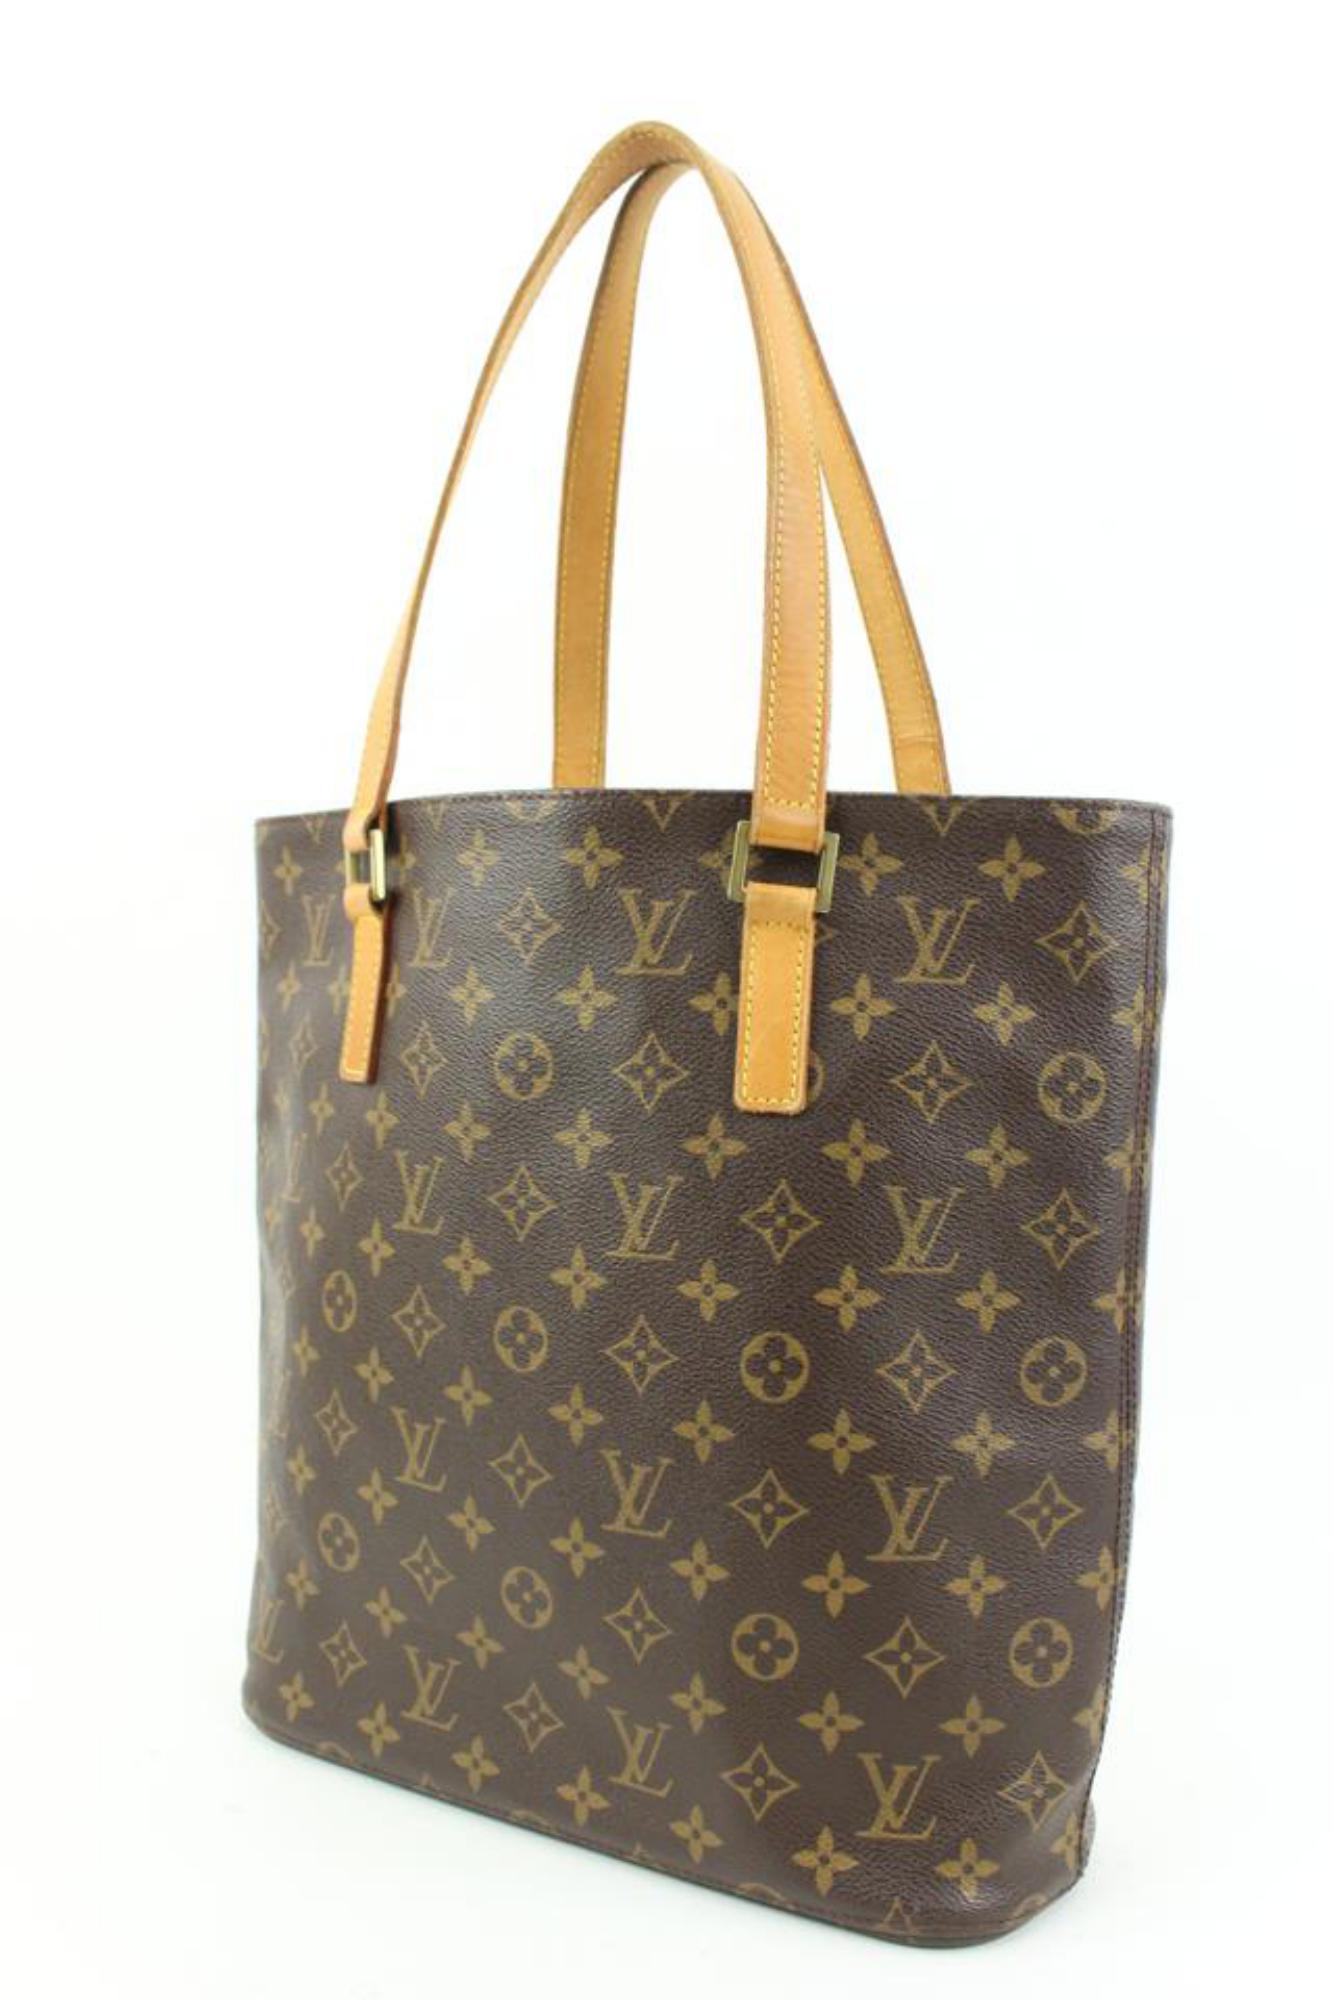 Louis Vuitton Discontinued Monogram Vavin GM Structured Shopper Tote Bag 53lv23s
Date Code/Serial Number: SR0014
Made In: France
Measurements: Length:  13